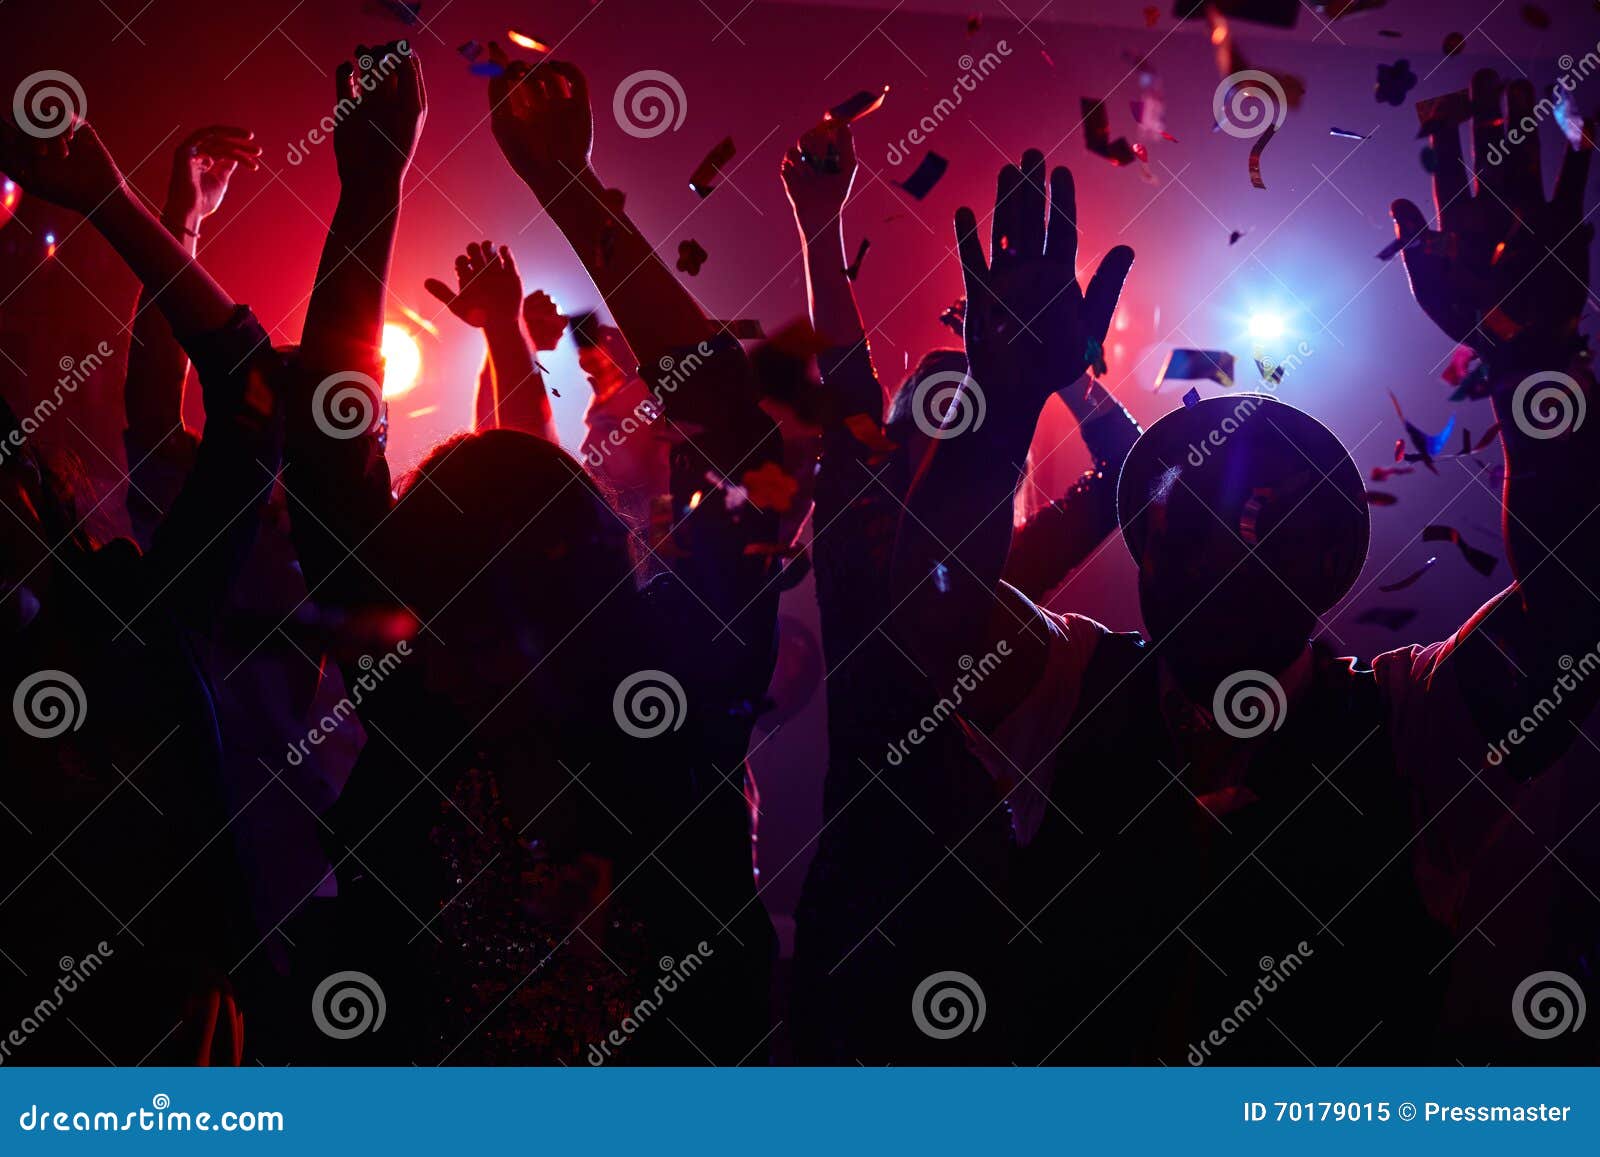 Disco fun stock image. Image of clubber, disco, young - 70179015